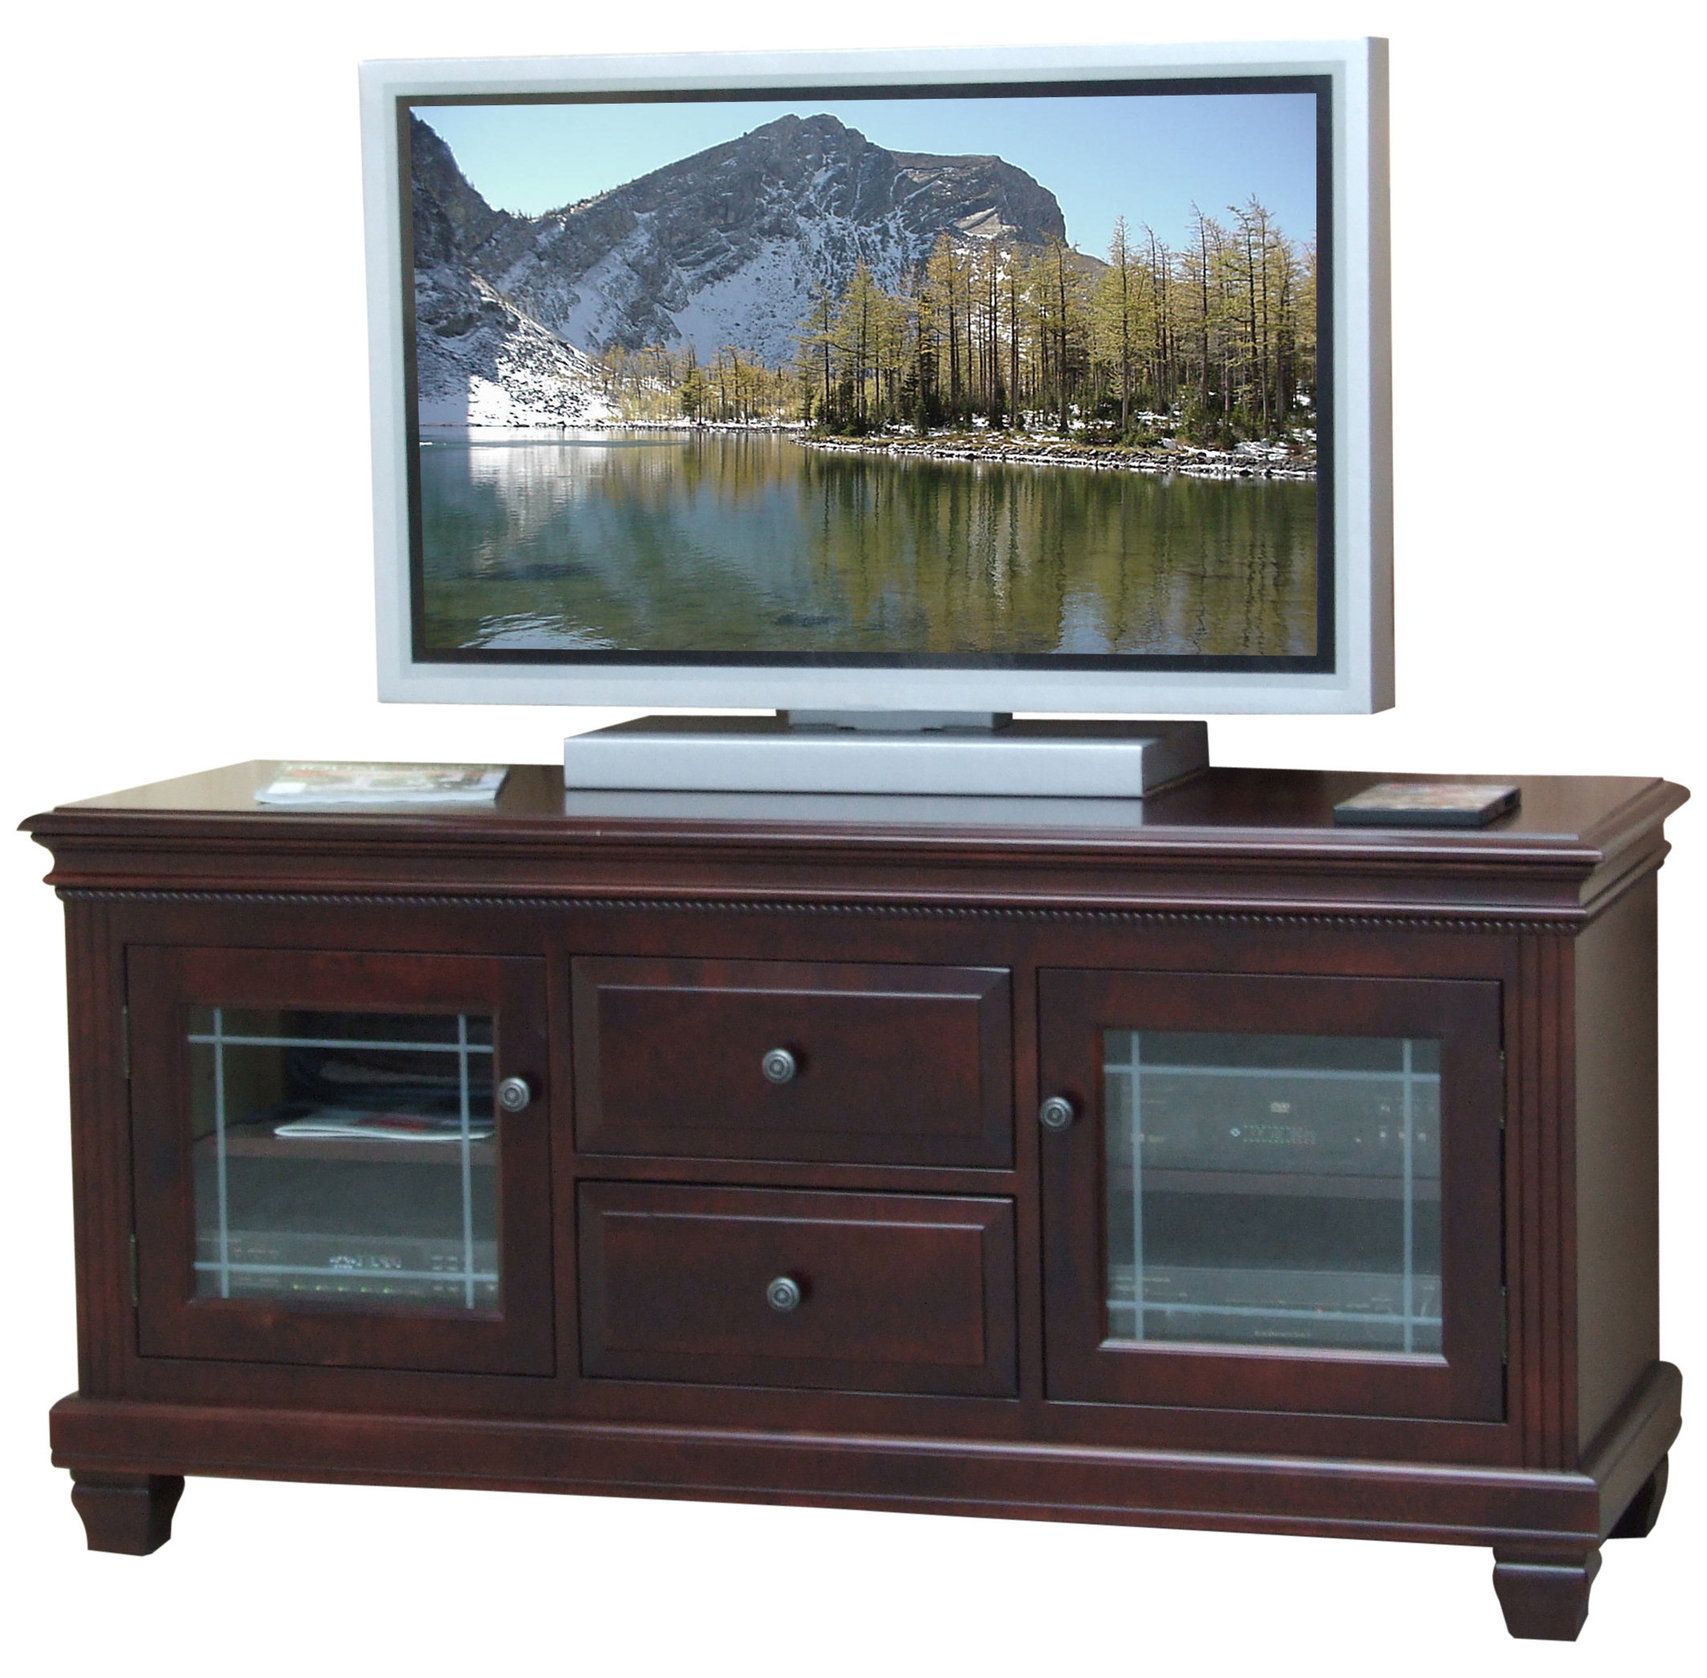 Wide Glass Door Tv Cabinet – Classic Eco Friendly Wood Inside Glass Tv Cabinets With Doors (View 7 of 15)